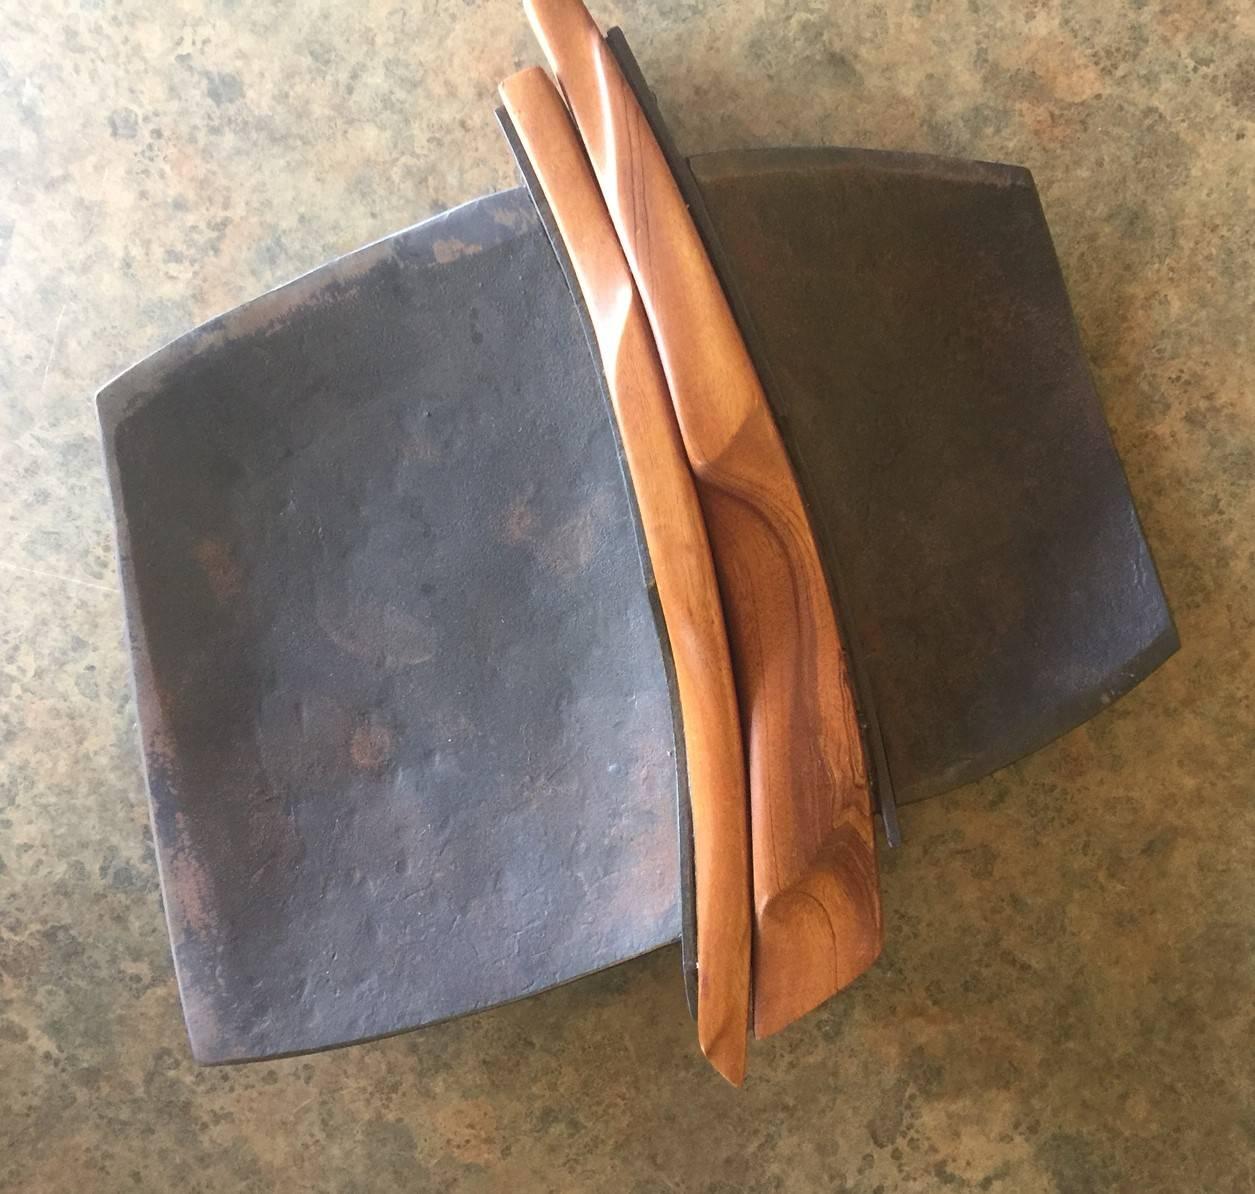 Very unique Primitive tray or centerpiece made of iron and wood teak. The piece is very solid, heavy and quite impressive.